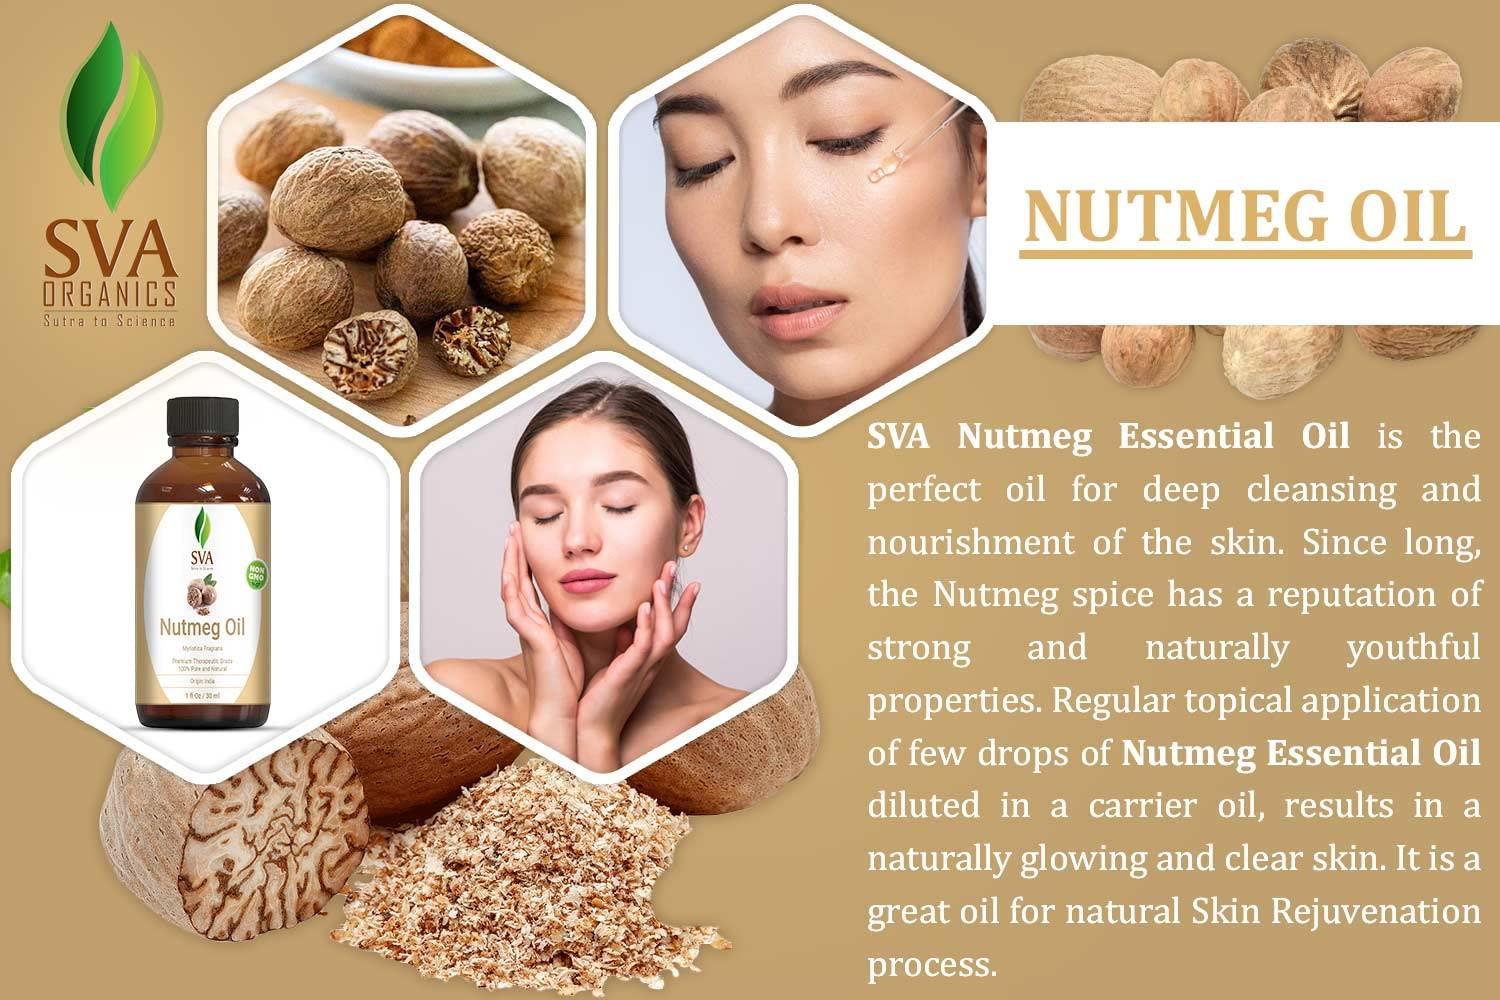 SVA Nutmeg Essential Oil 1 Oz Premium Therapeutic Grade 100% Pure Natural  Undiluted with Dropper for Skin, Aromatherapy & Hair Care